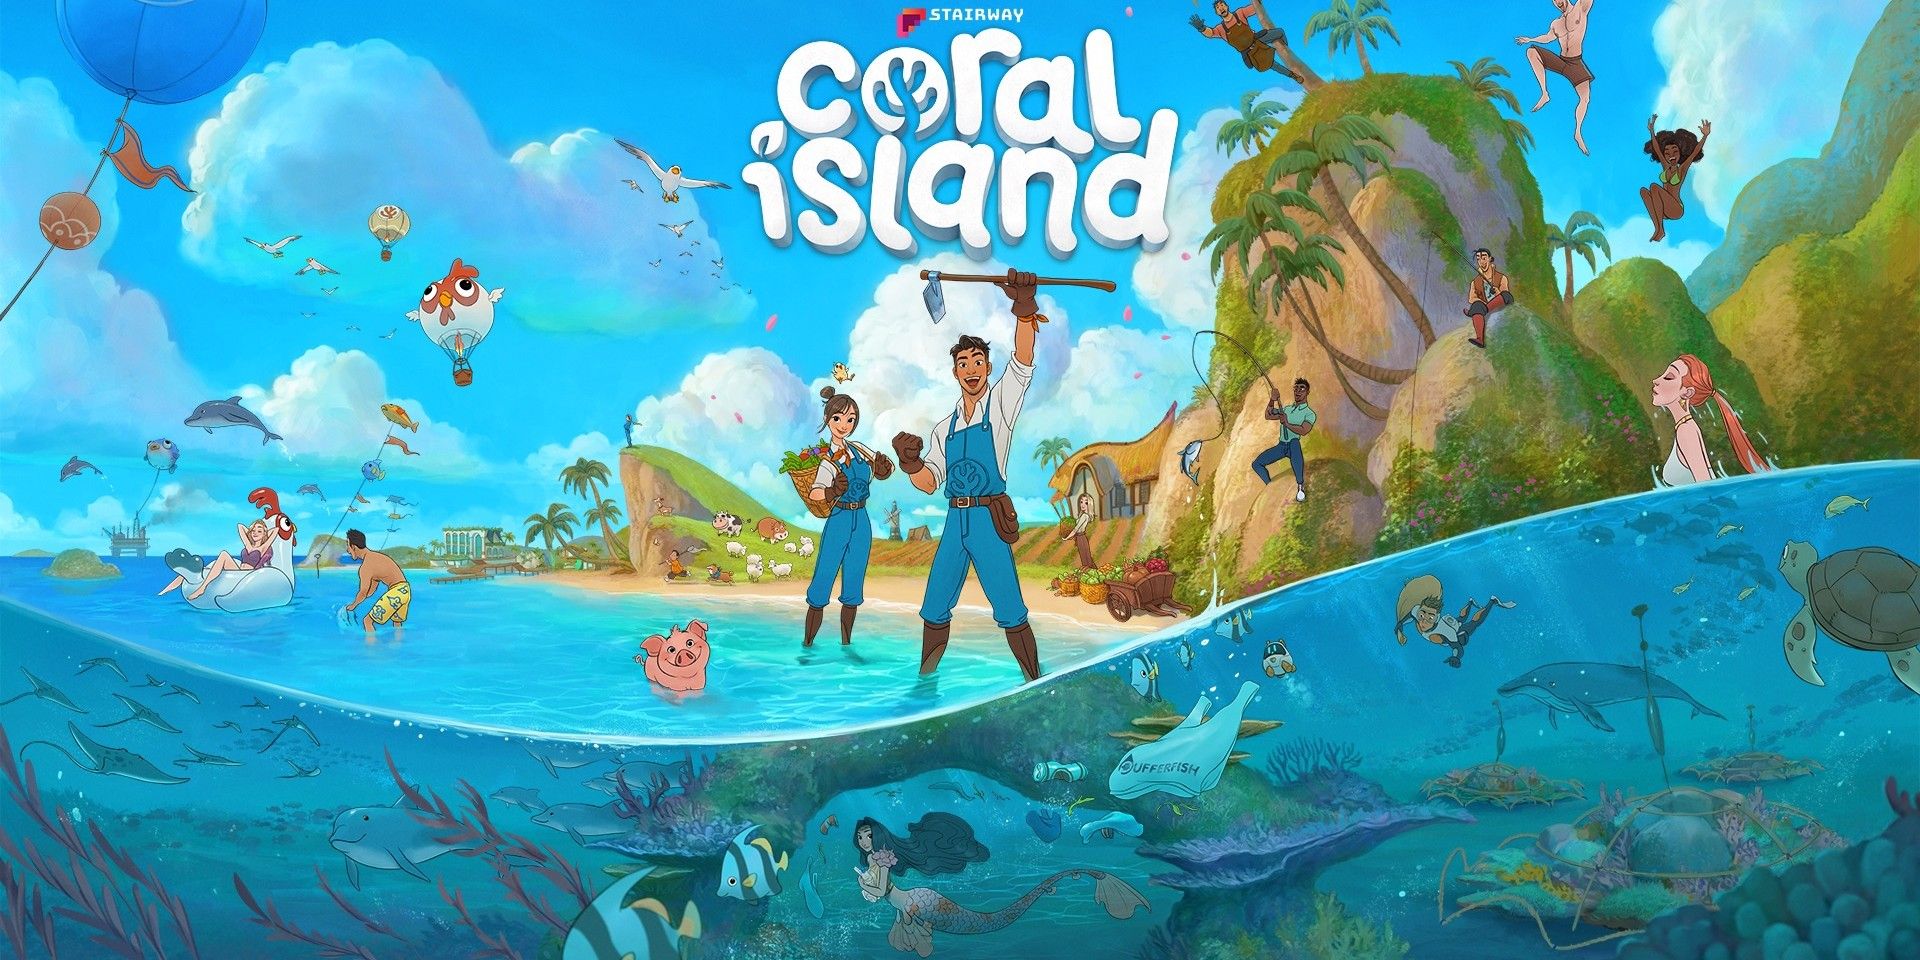 A promotional image for the game Coral Island